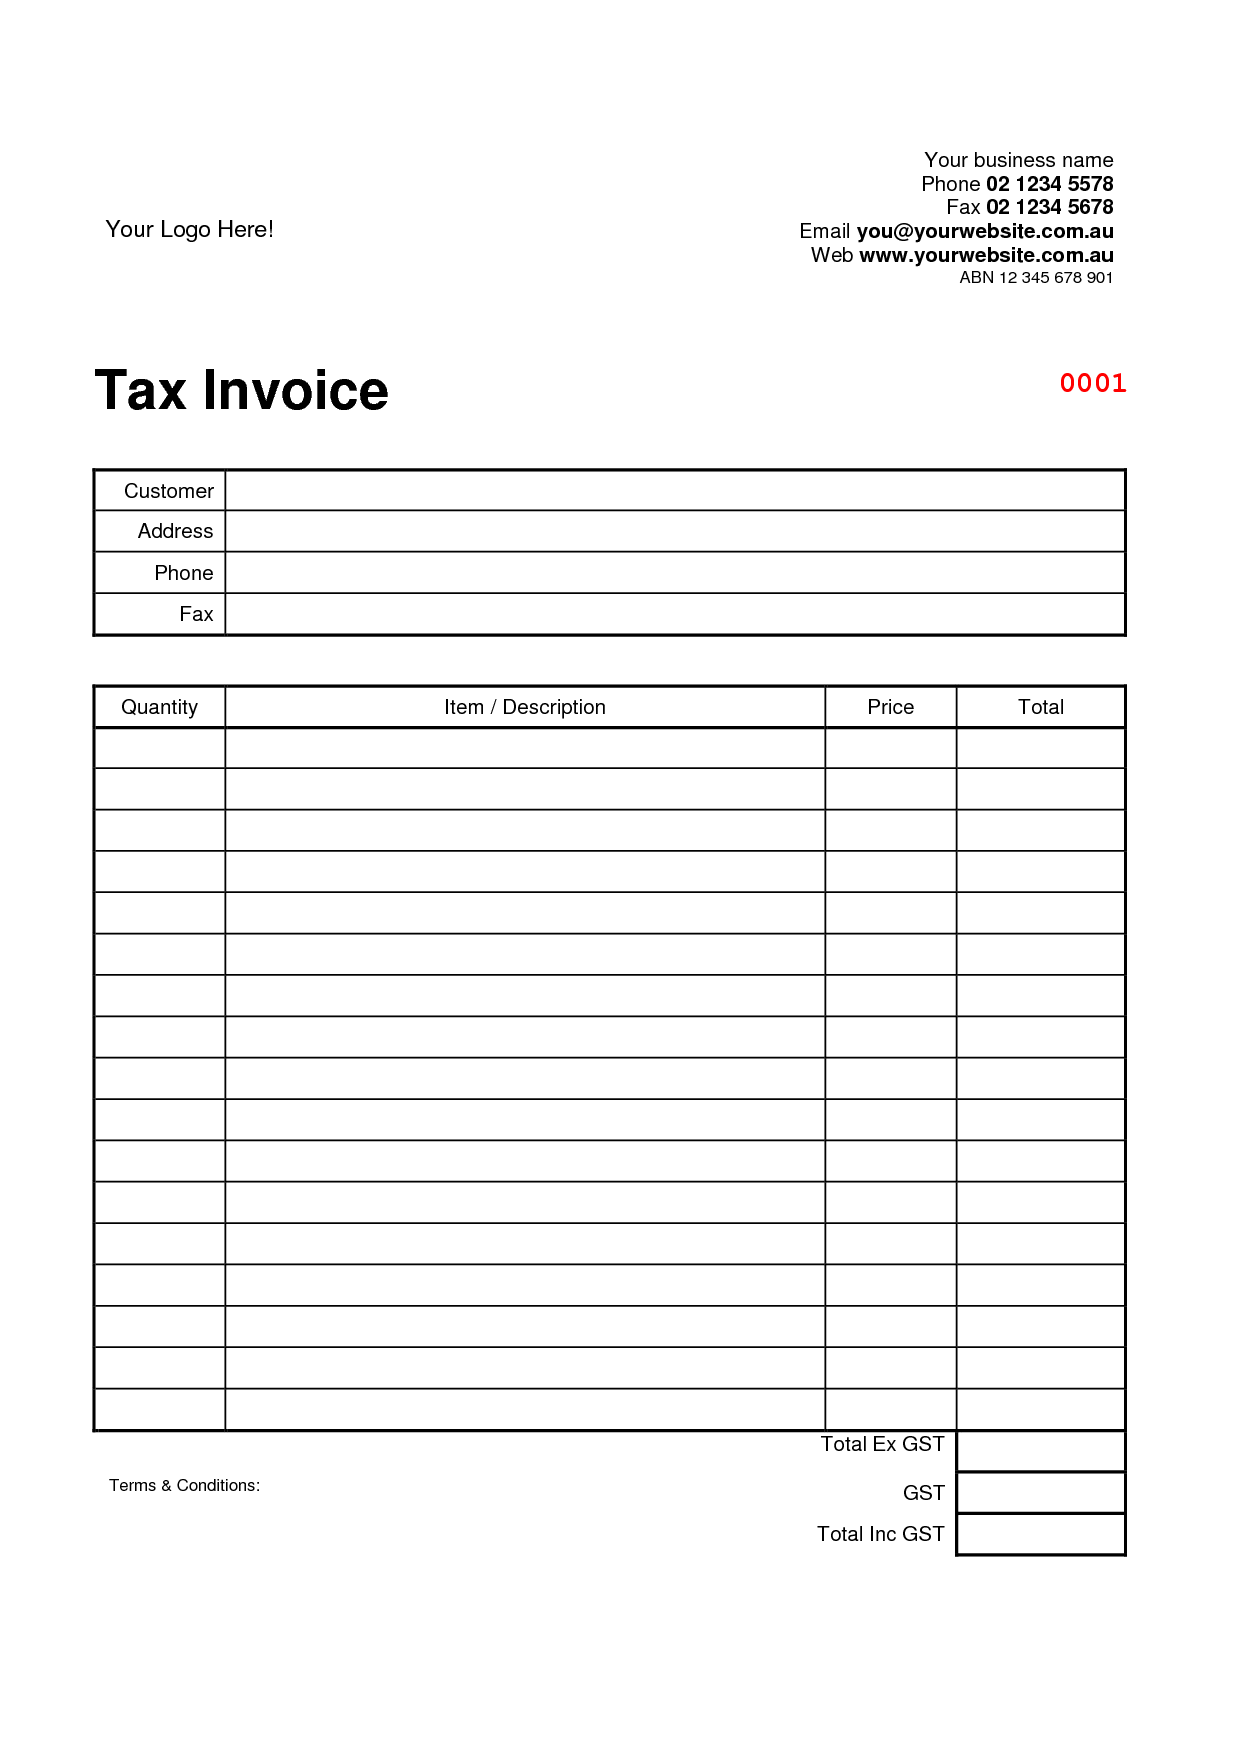 tax-invoice-template-word-doc-invoice-example